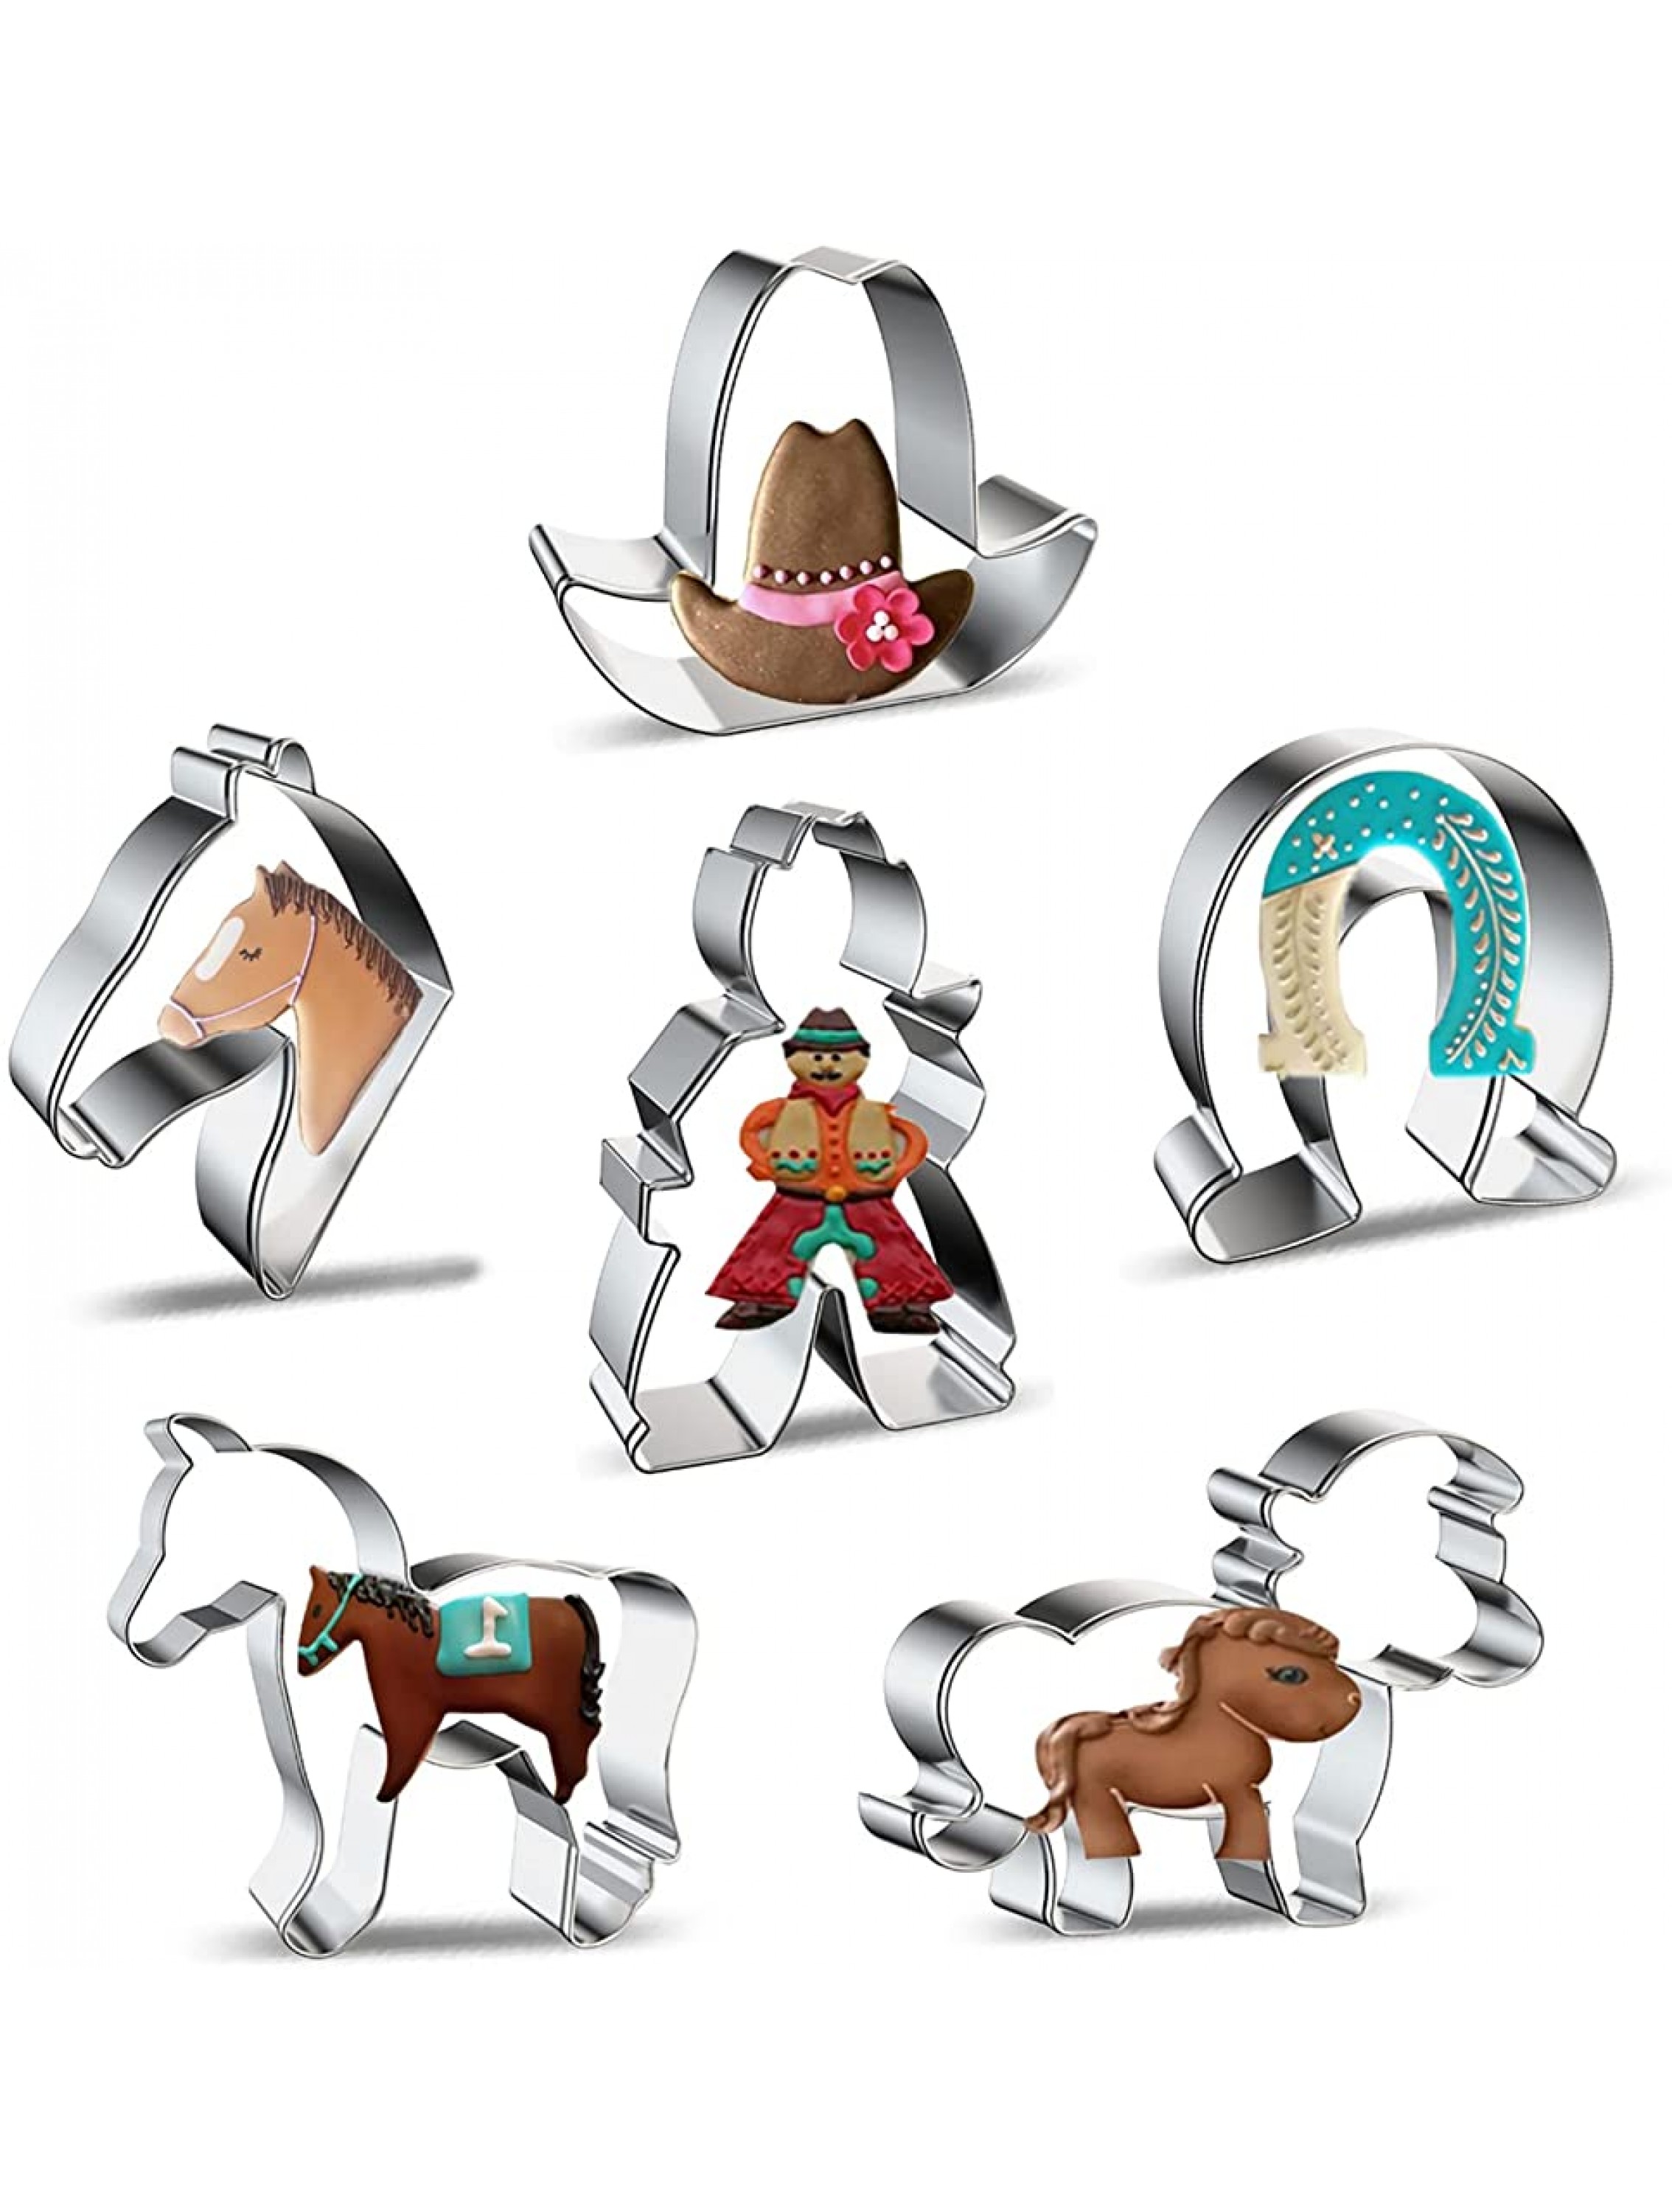 Horse Cowboy Cookie Cutters Shapes Baking Set 6 Pieces Stainless Steel Metal Mold with Horse Pony Horse Head Horseshoe Cowboy Cowboy Hat Cookie Cutter for Biscuit Pastry Fondant Gingerbread Cake - BCNTRS39C